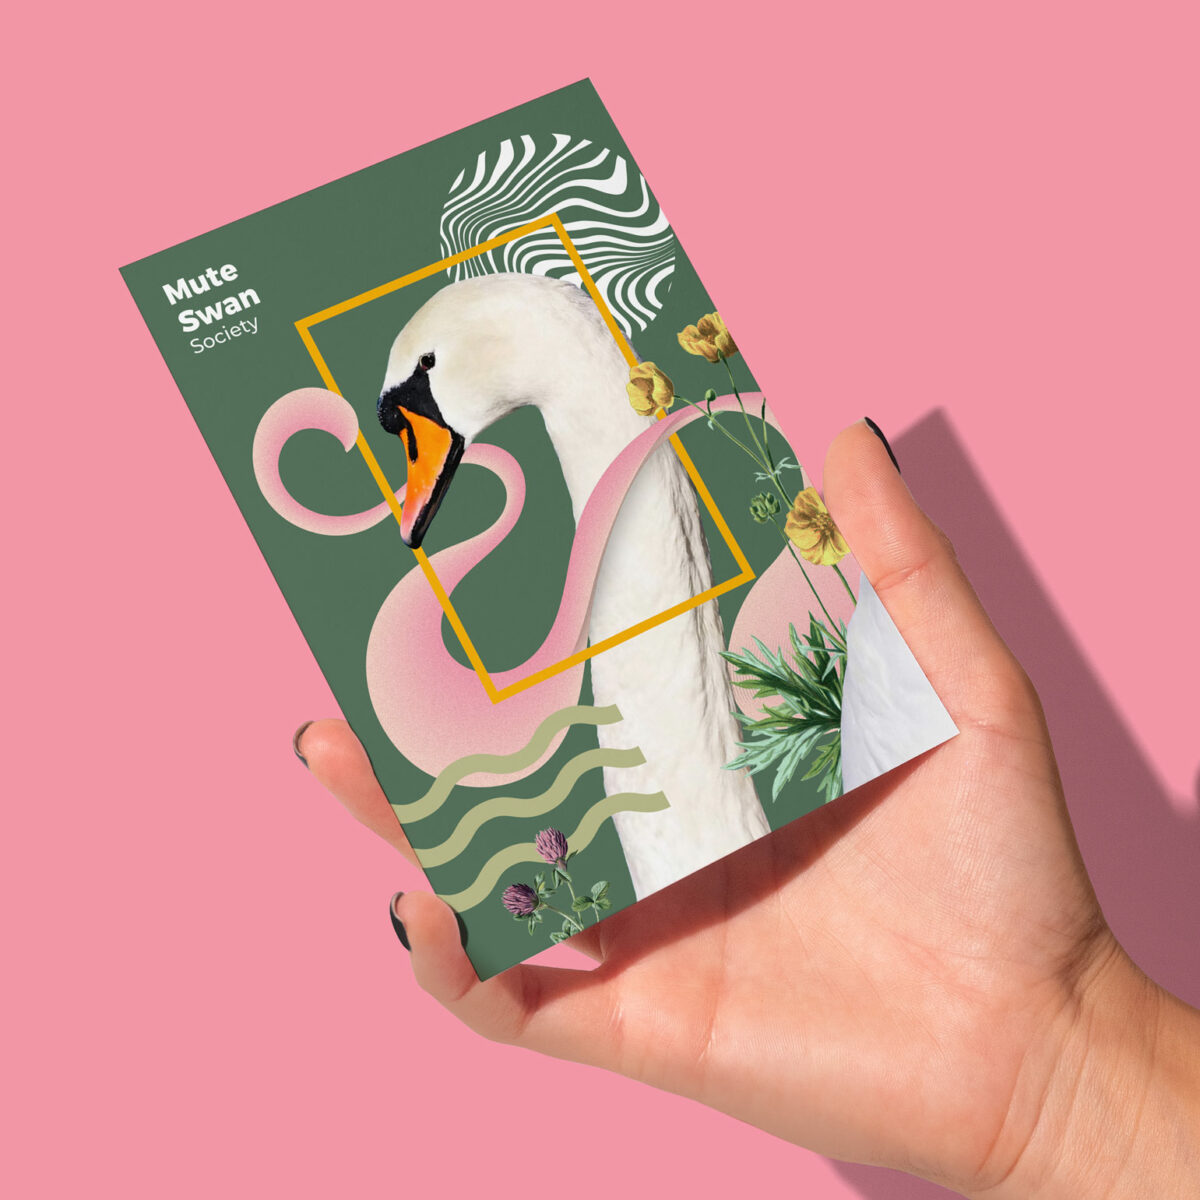 A hand holding the swan postcard against a pink background.